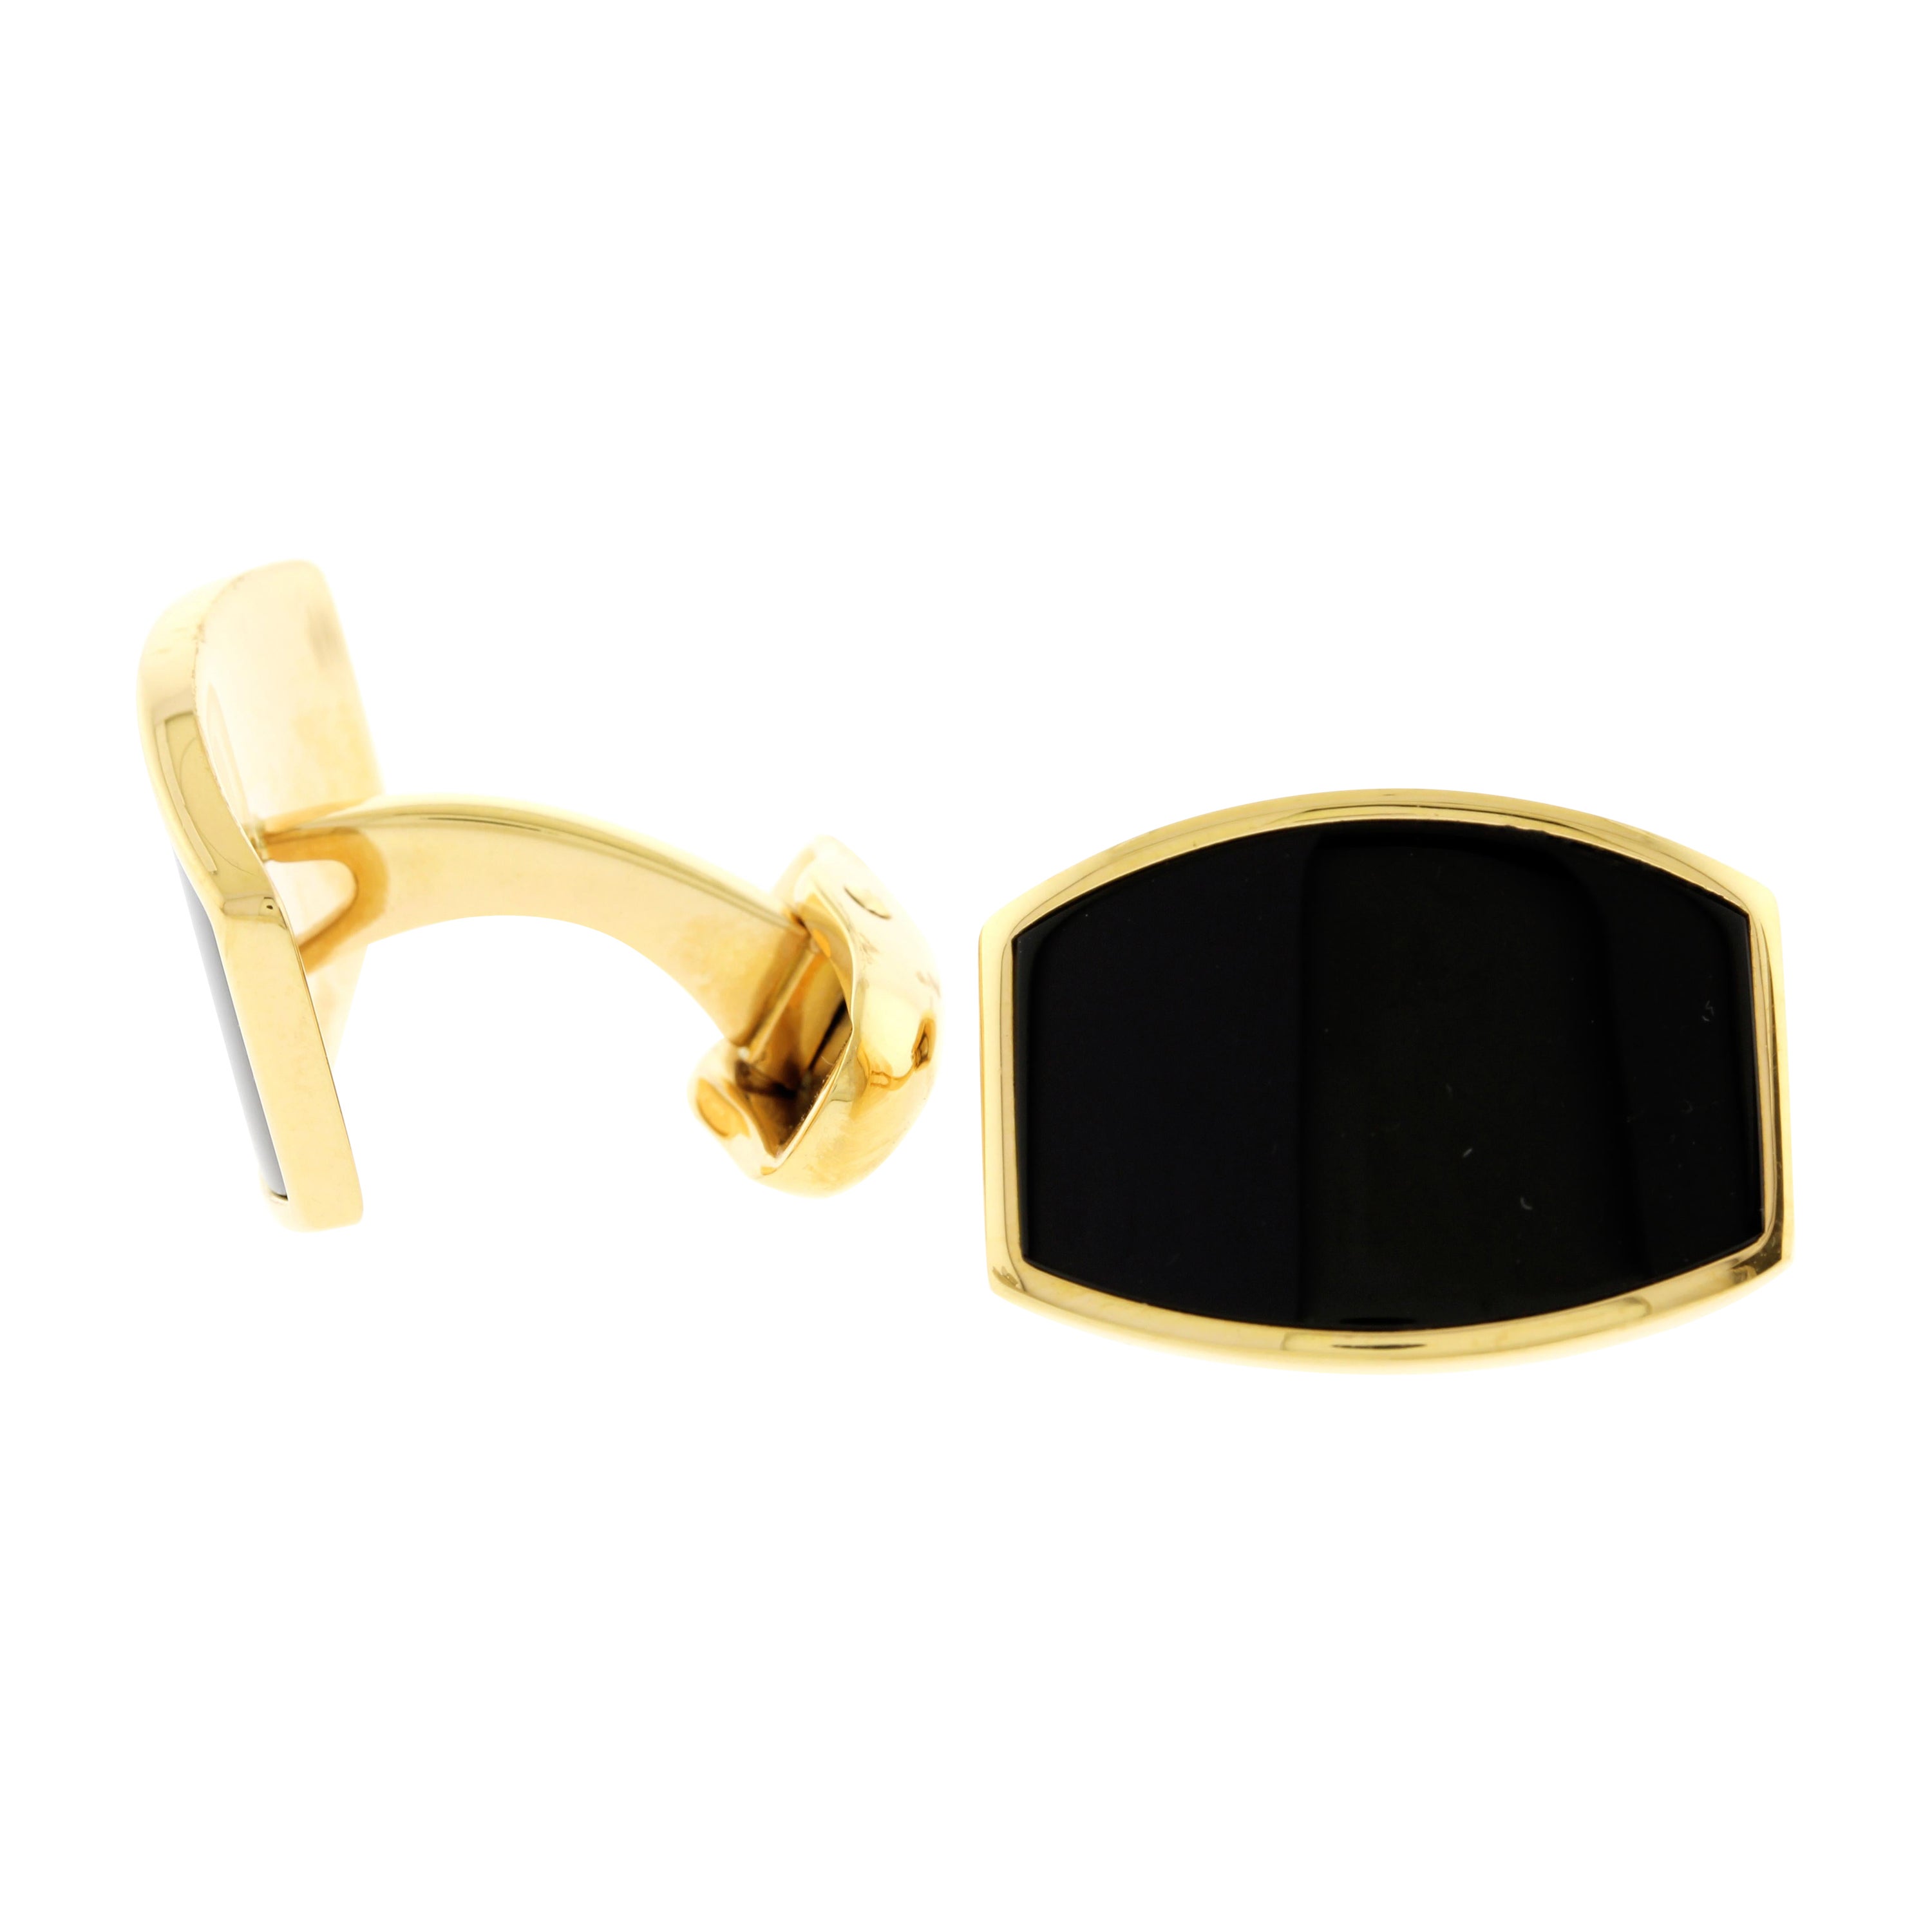 Victor Mayer 18kt Rose Gold and Black Onyx Cufflinks